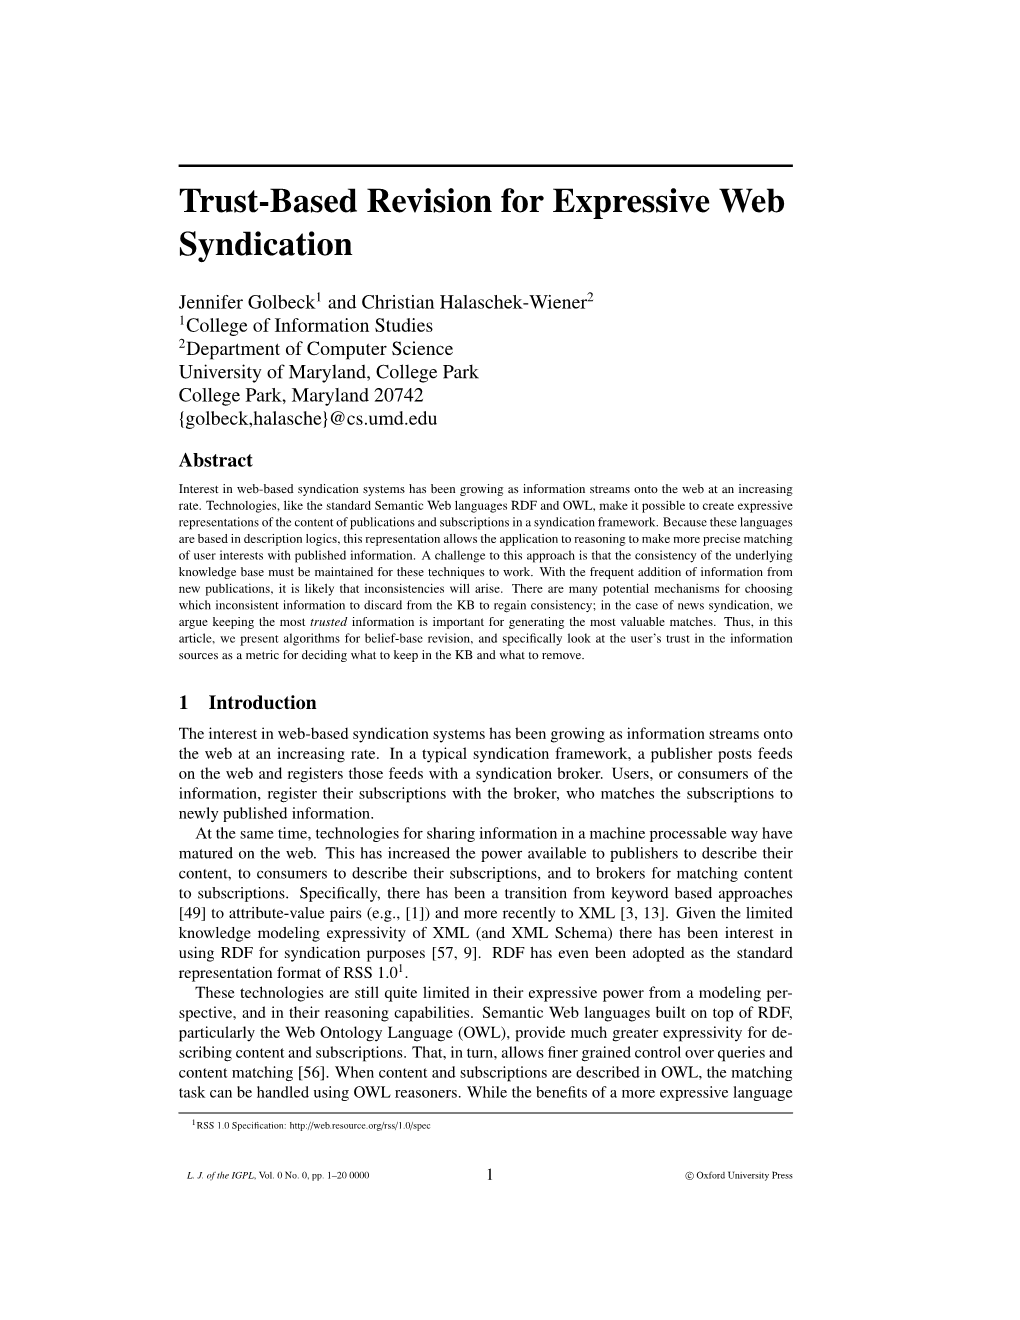 Trust-Based Revision for Expressive Web Syndication